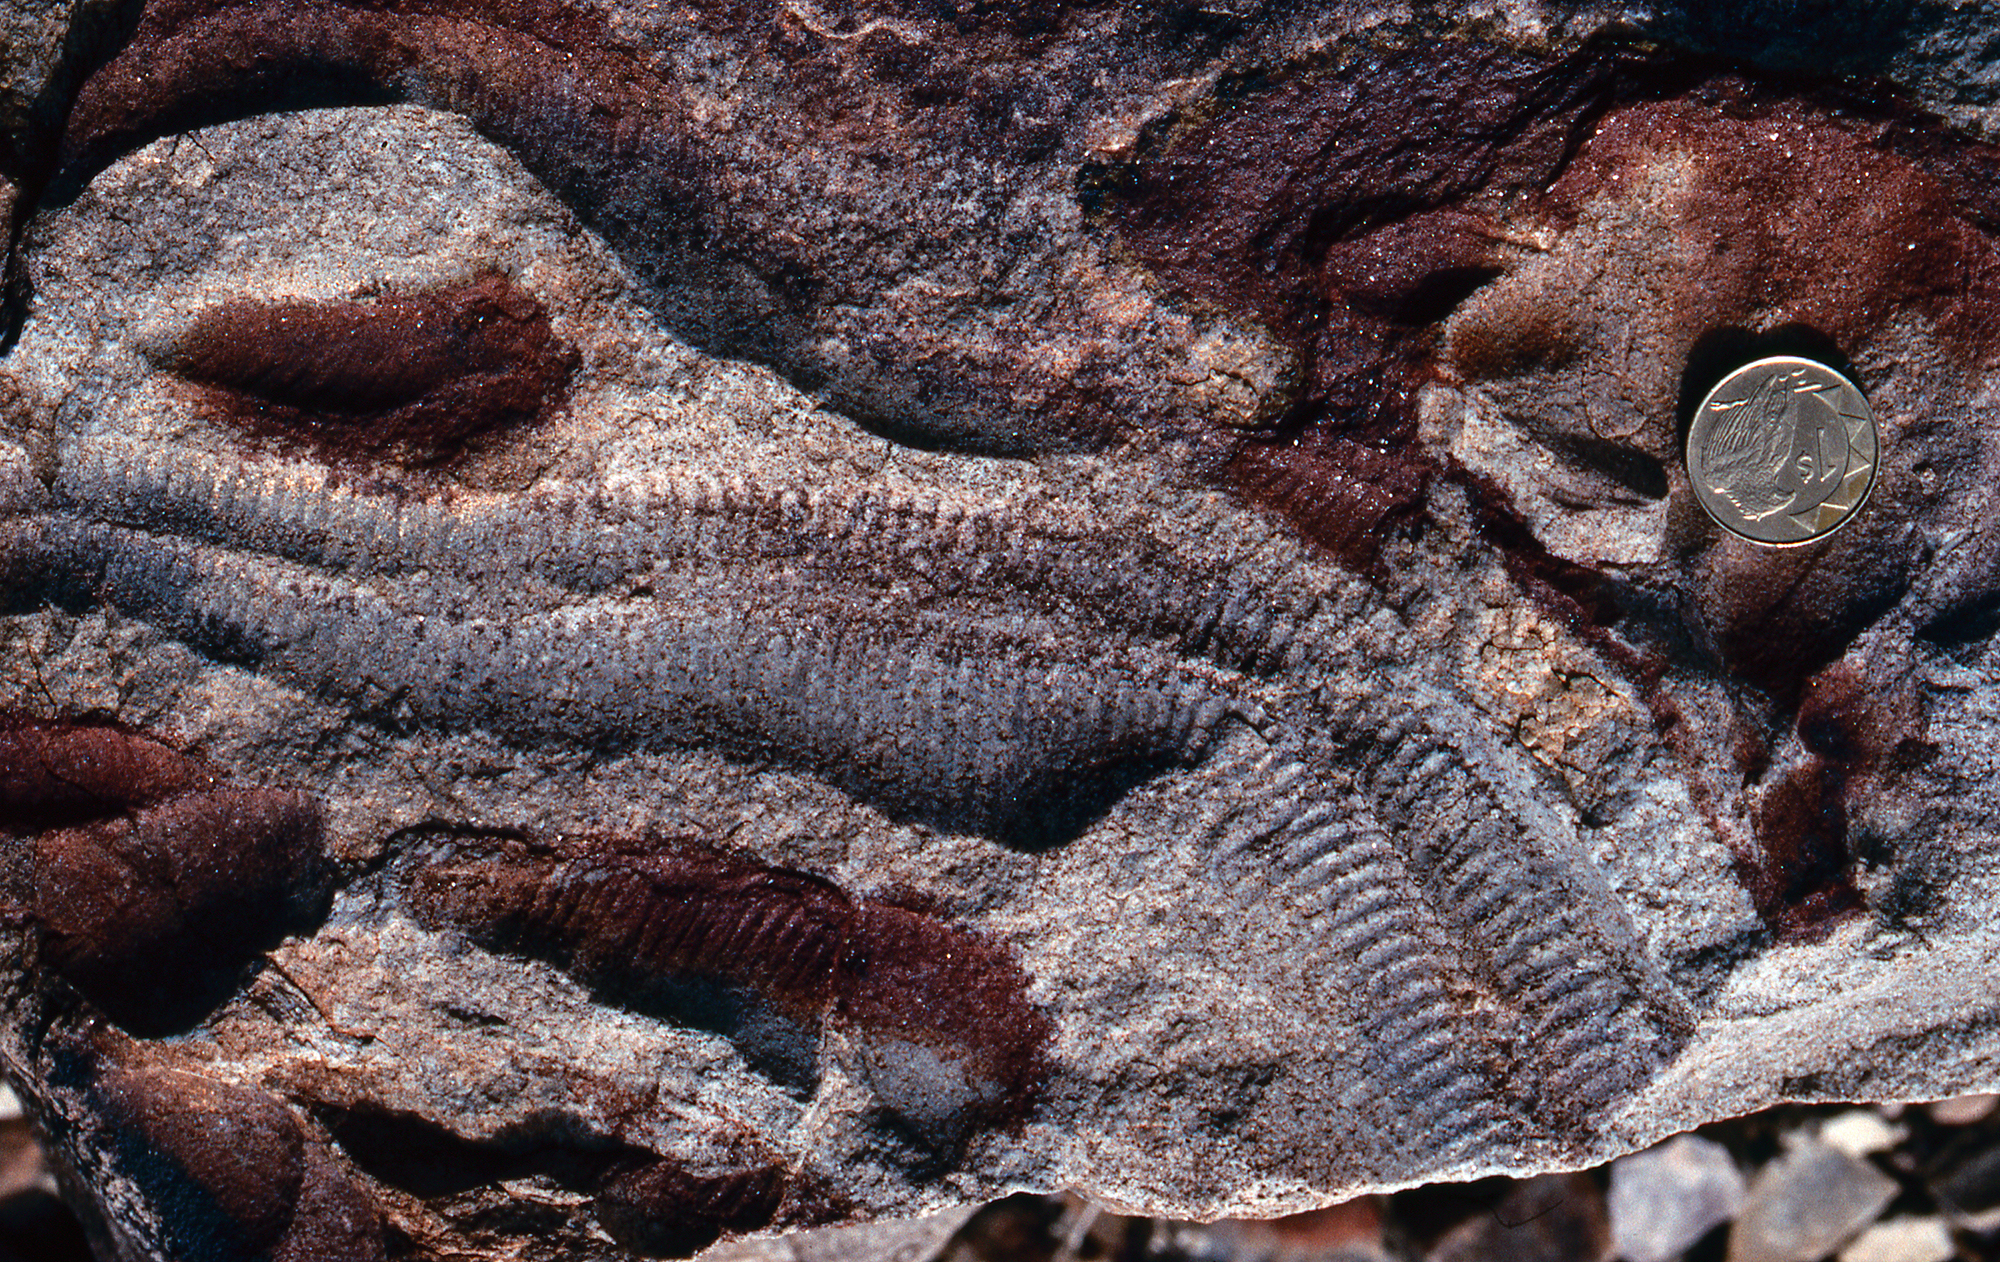  Earliest animals evolved in the mid to late Proterozoic Eon and lie deep in the fossil record. Depicted in the photo is an example of the Pteridinium genus. Credit: Douglas Erwin / National Museum of Natural History